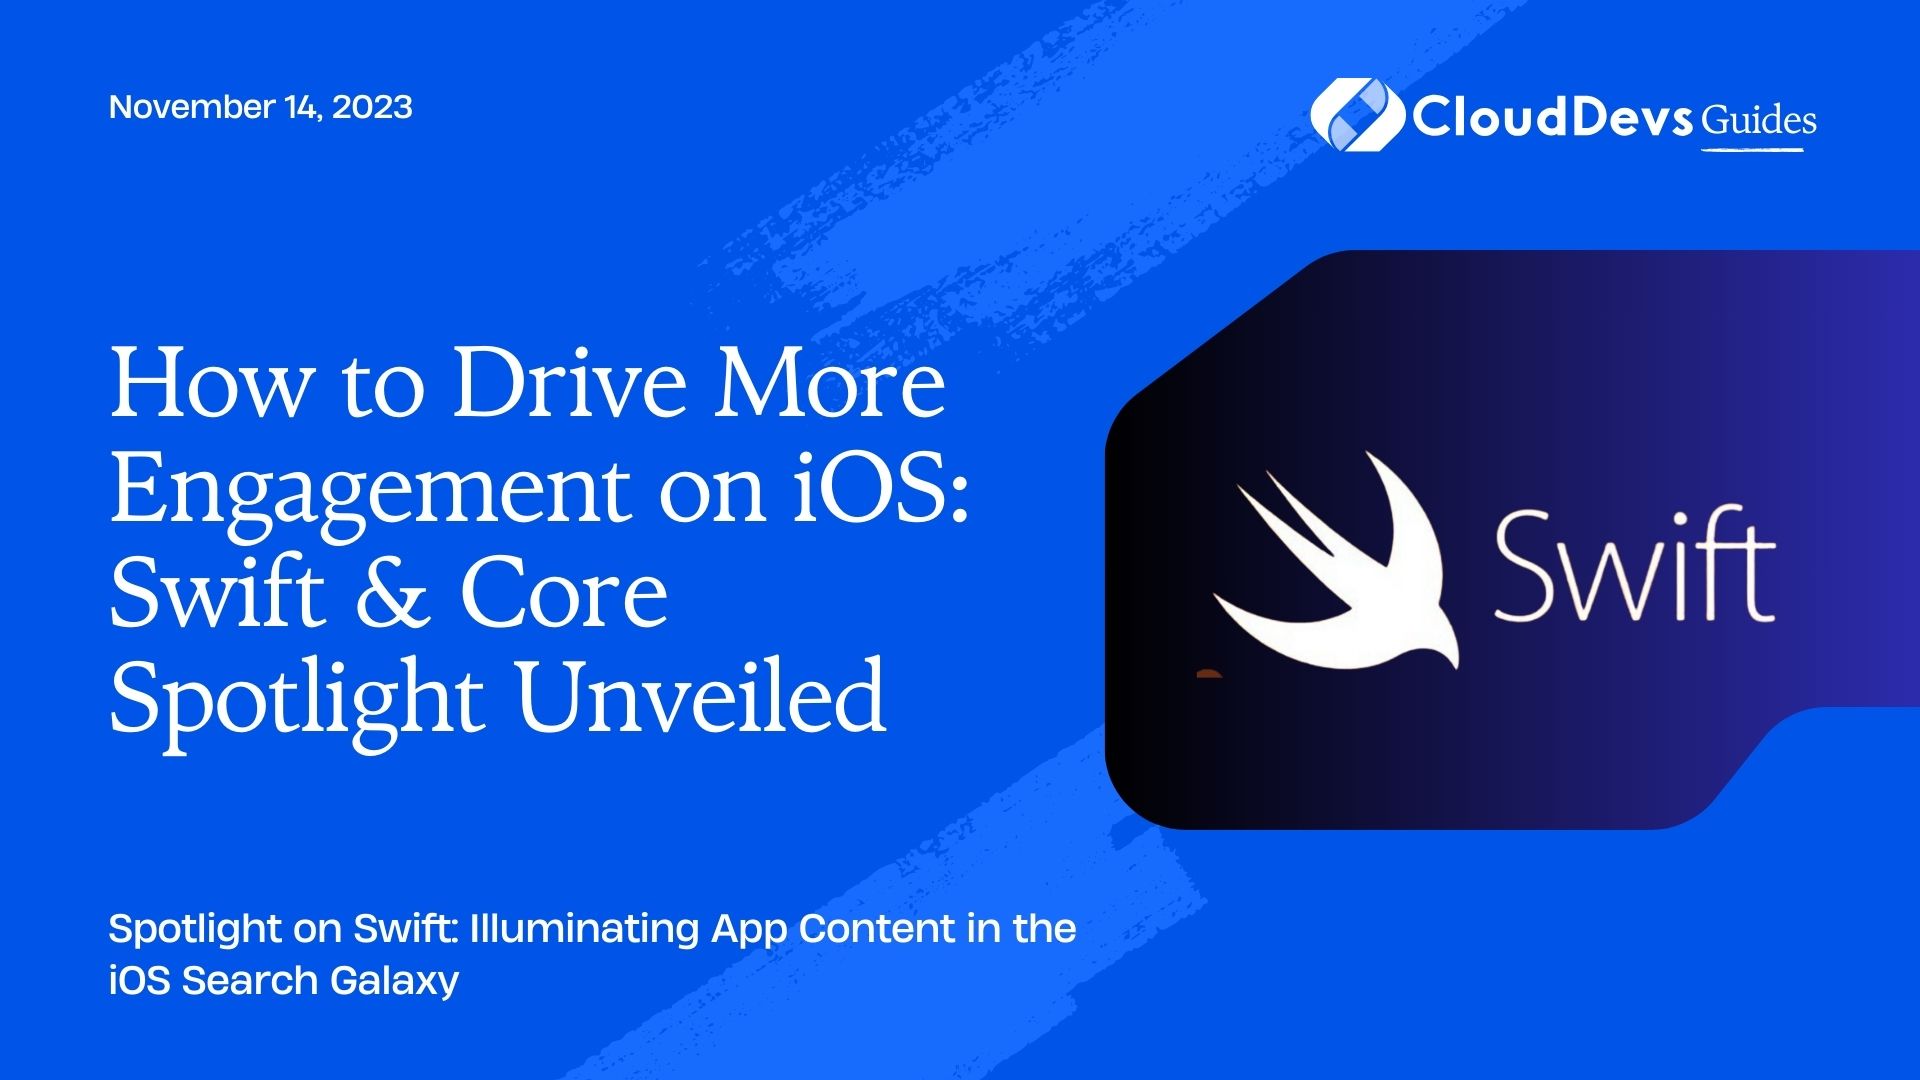 How to Drive More Engagement on iOS: Swift & Core Spotlight Unveiled